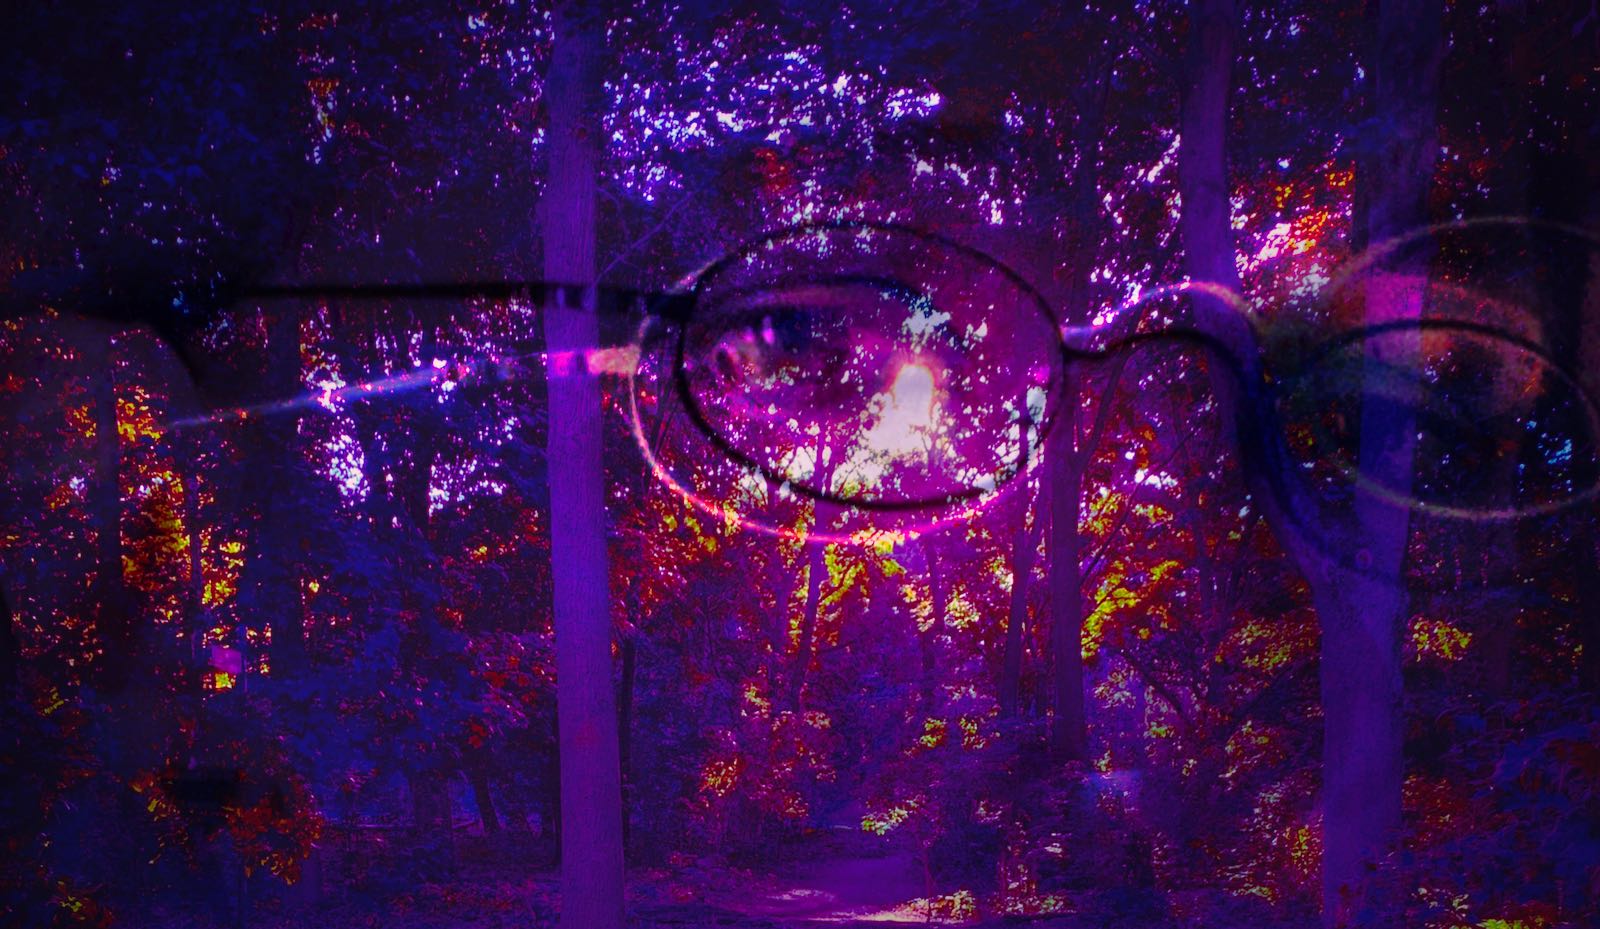 Heavily color-distorted photos of an eye and a forest superimposed on each other